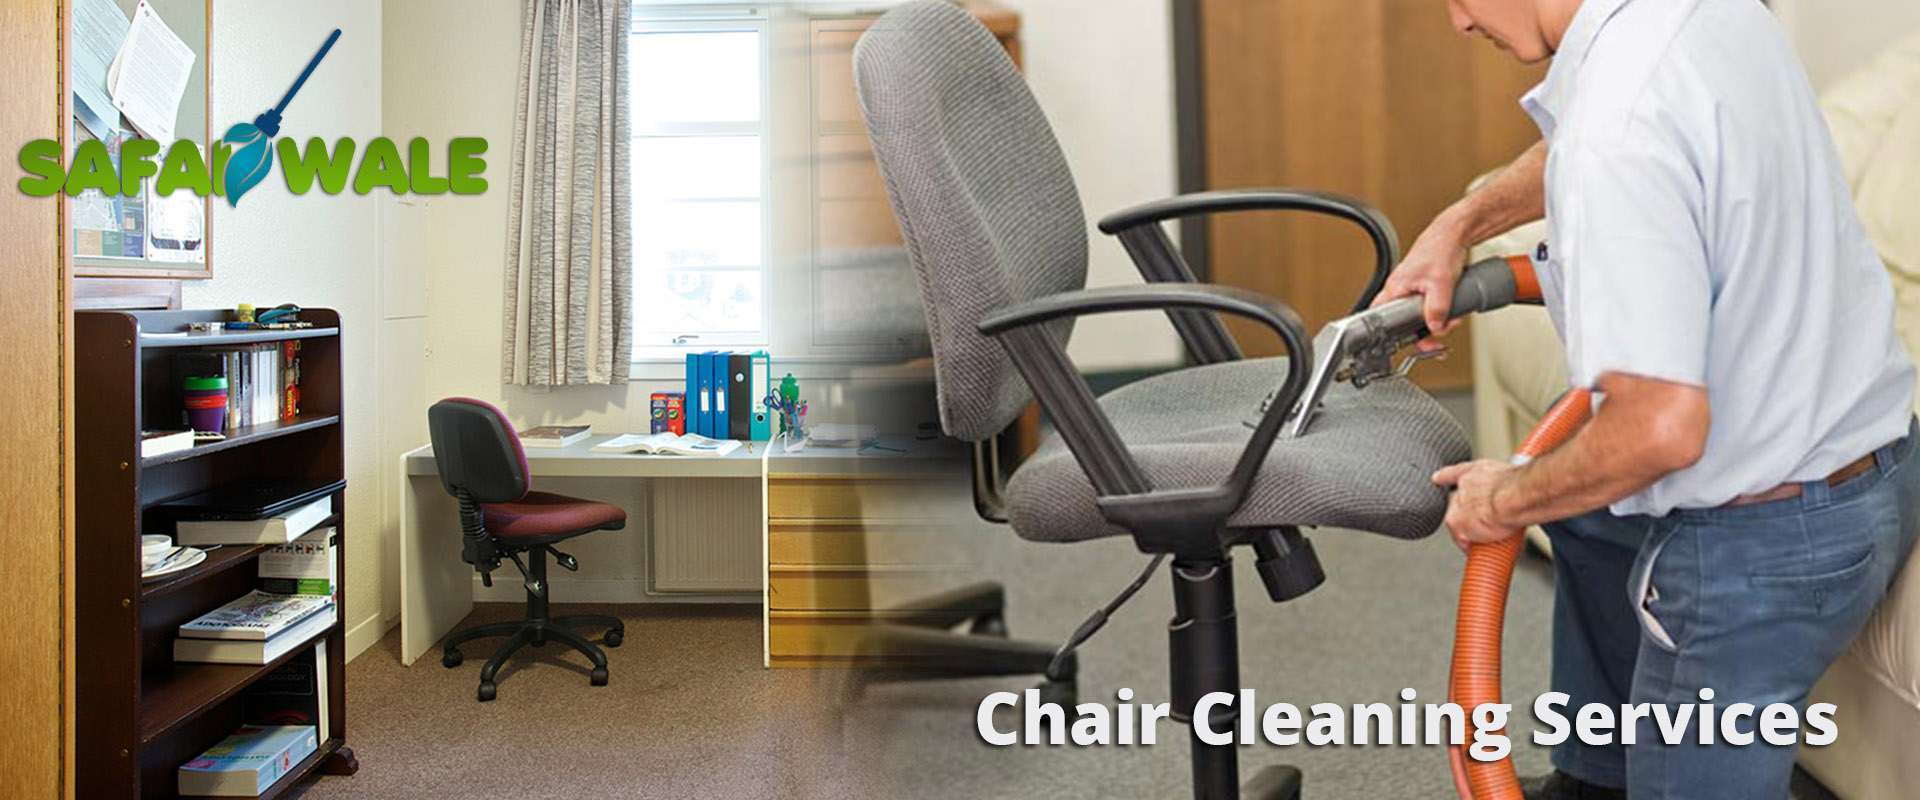 chair cleaning services in ghaziabad